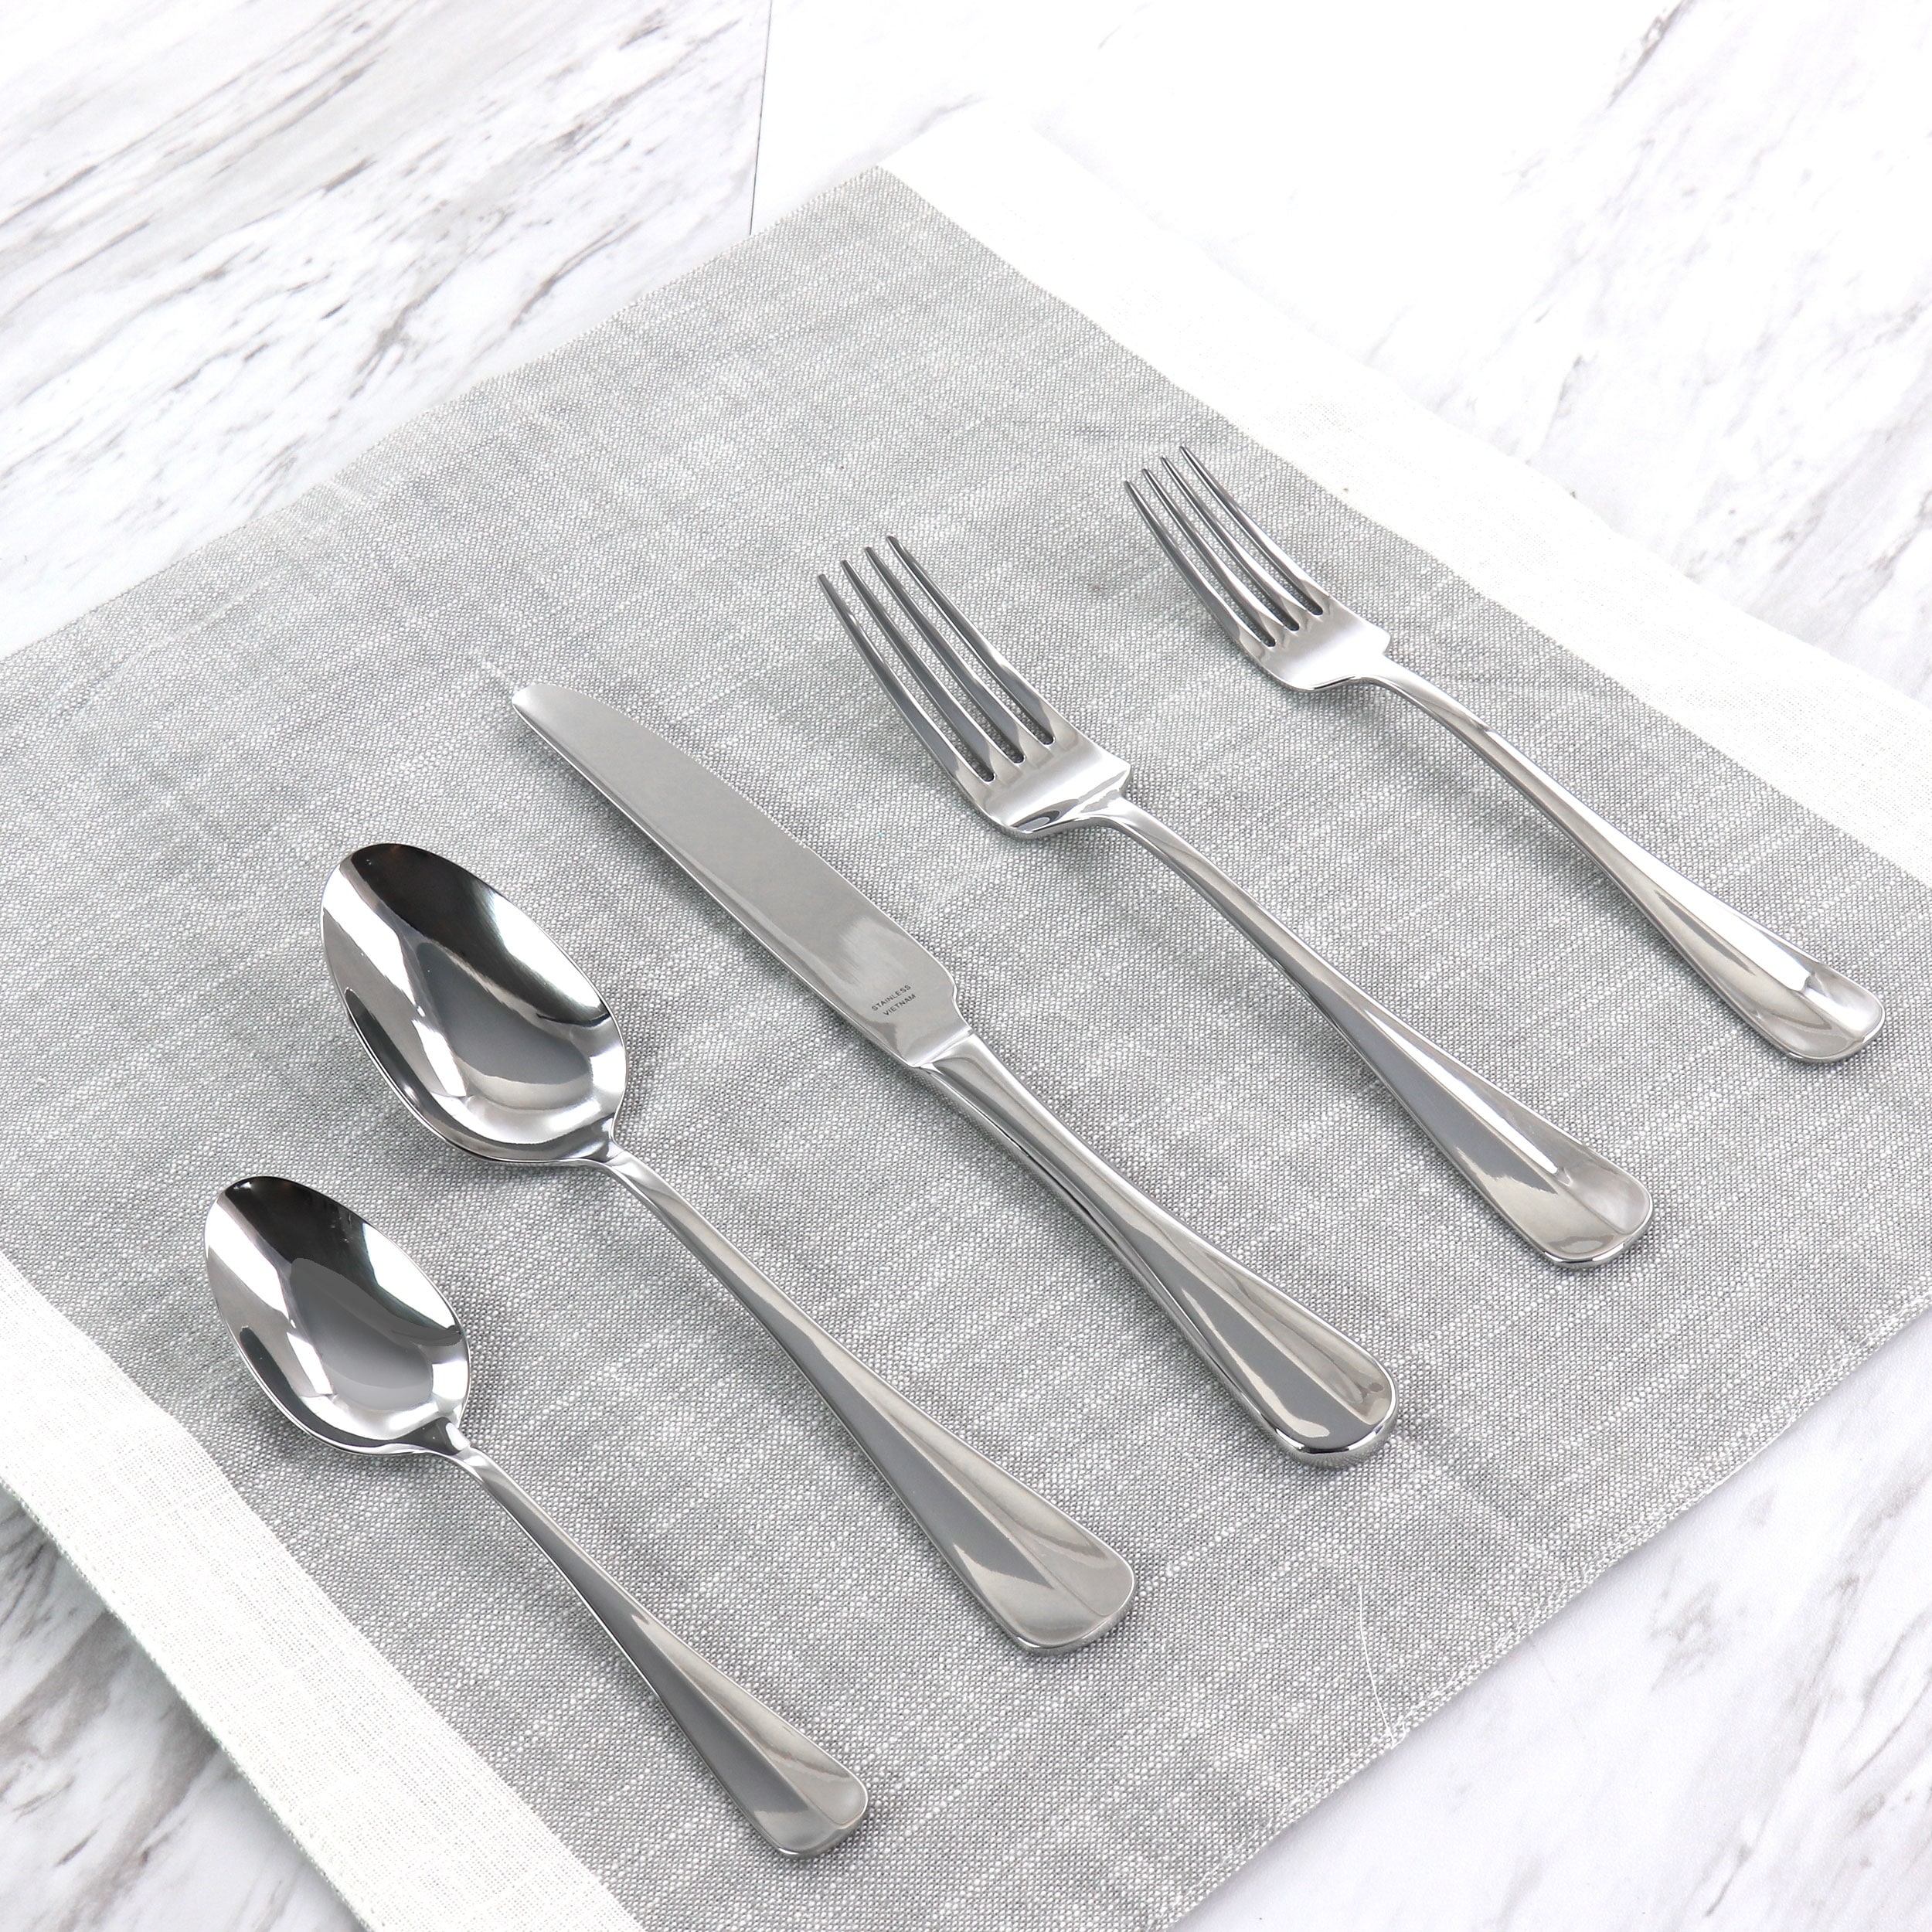 https://ak1.ostkcdn.com/images/products/is/images/direct/a6d8a5f7d826cfd4e1d91f5529be0b90aacc1a33/Martha-Stewart-Springbank-20-Piece-Stainless-Steel-Flatware-Set.jpg